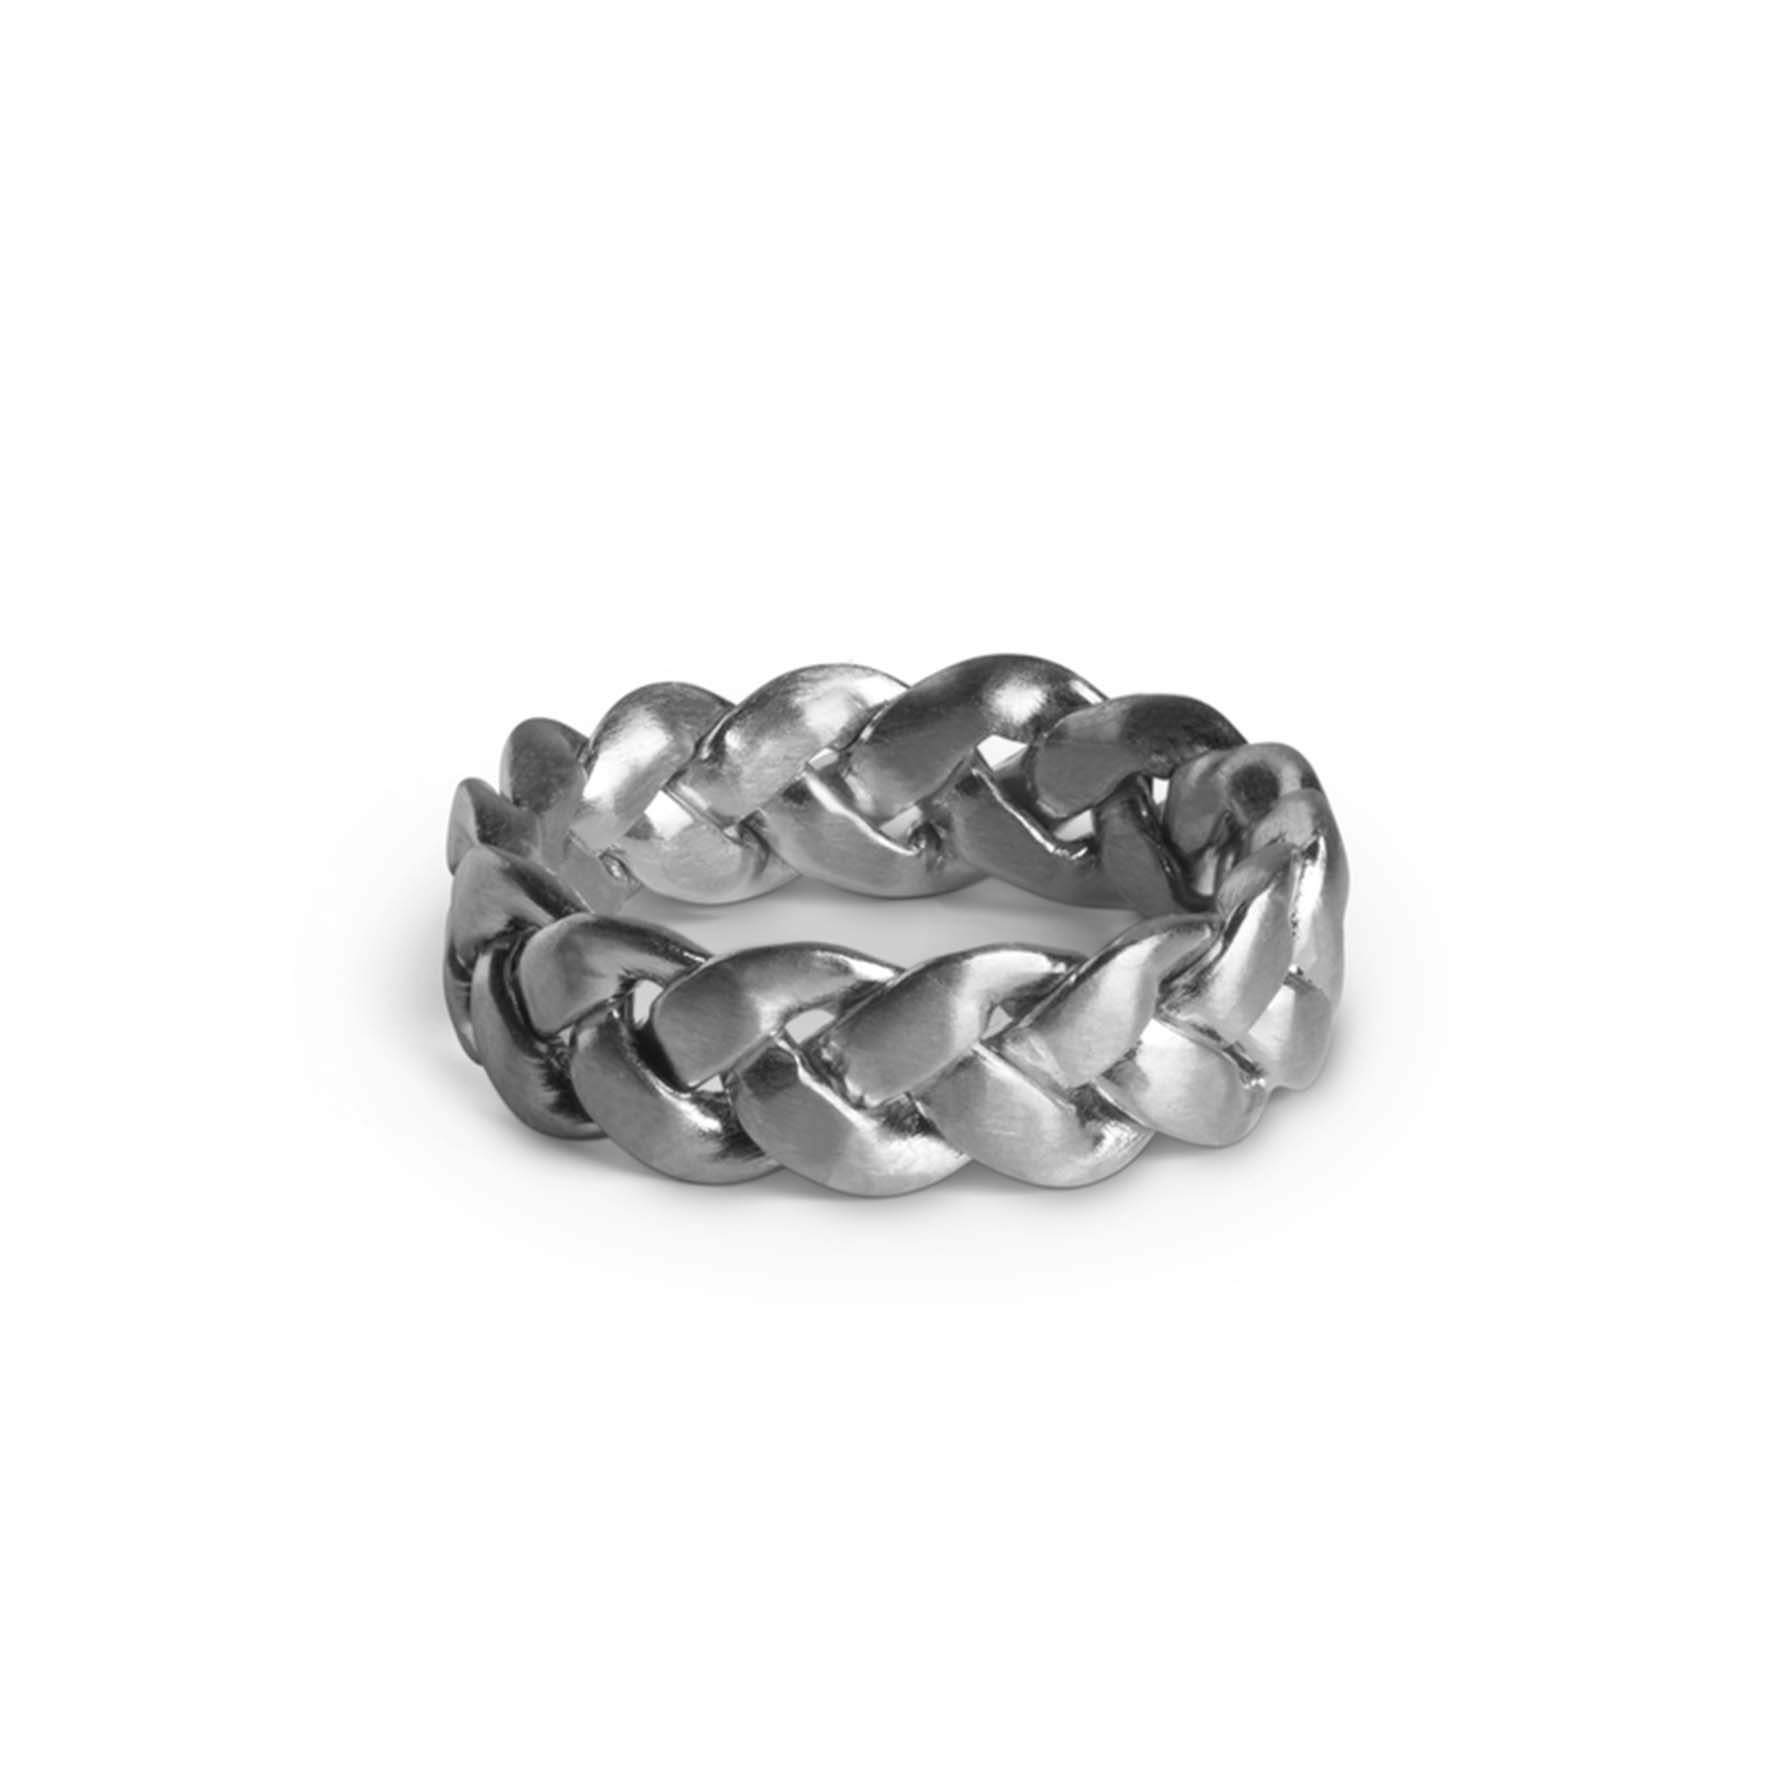 Big Braided Ring from Jane Kønig in Silver Sterling 925